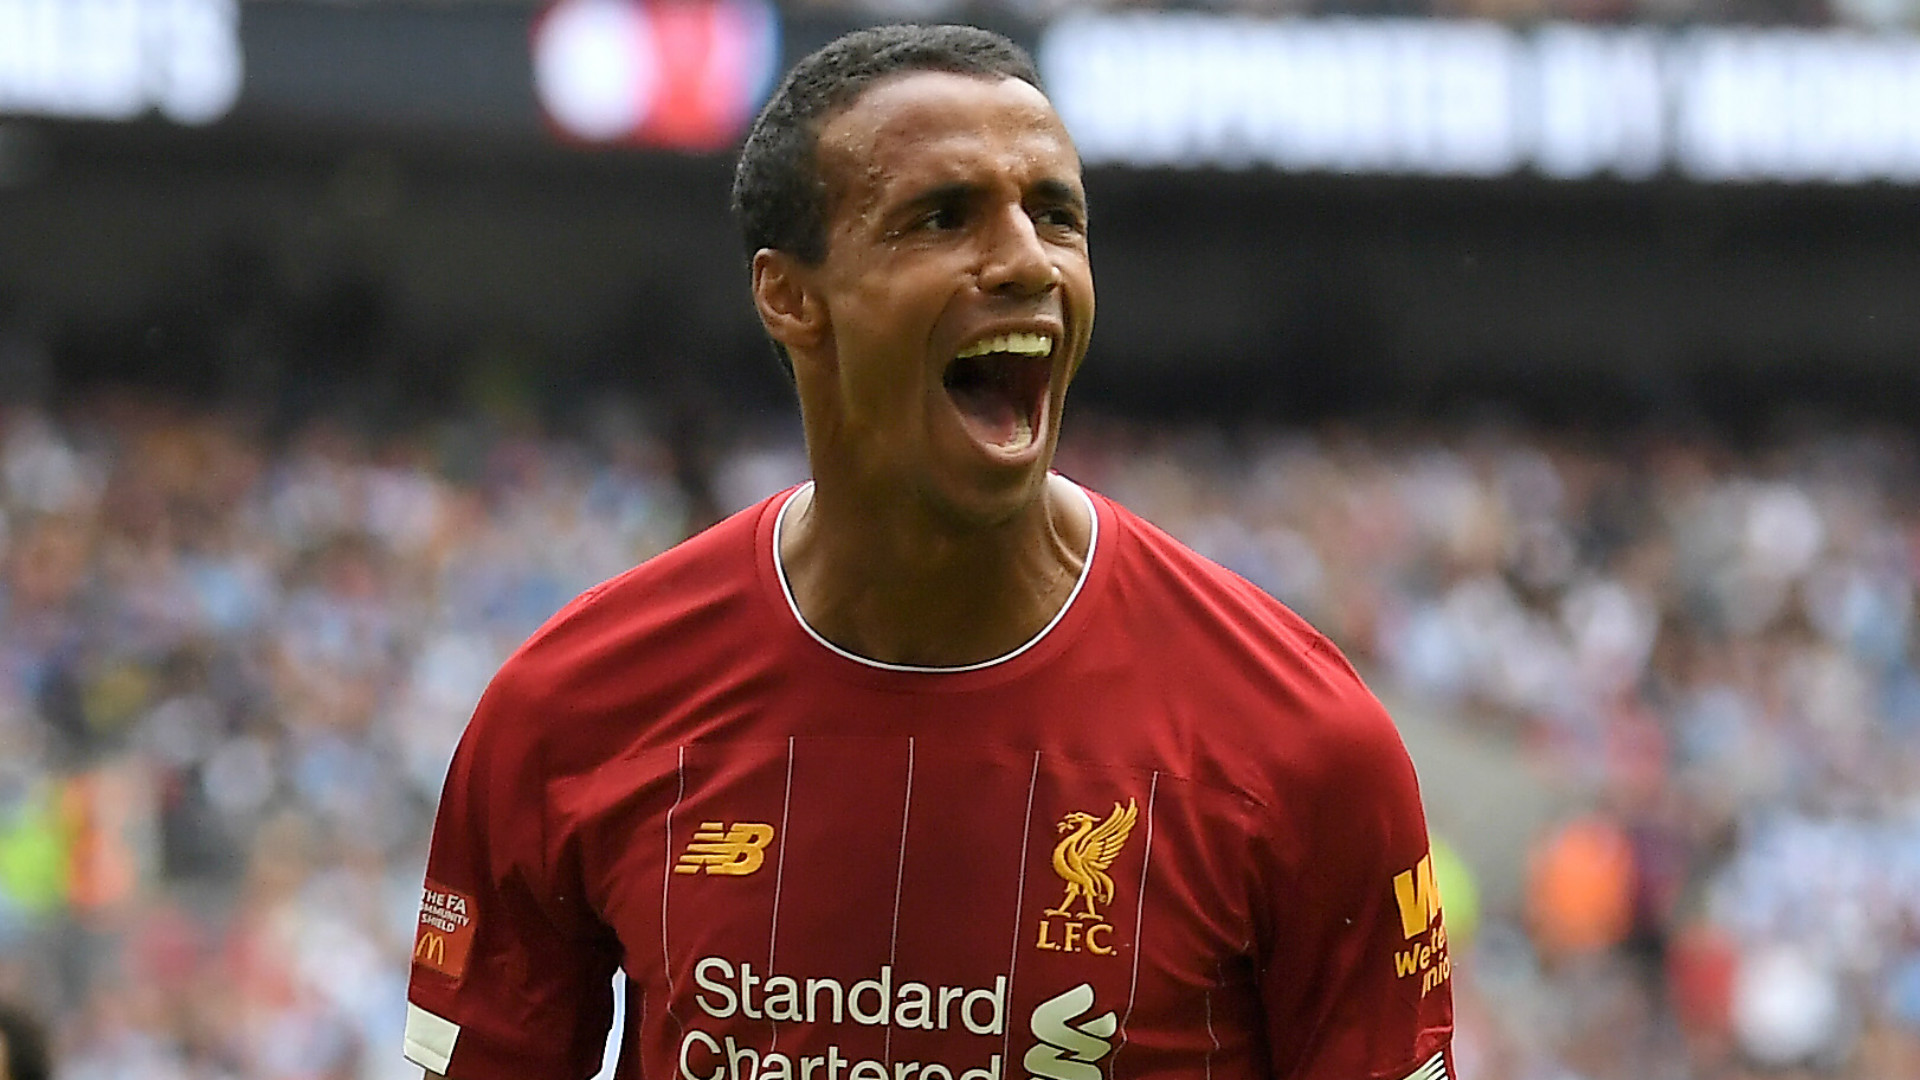 Liverpool can always fight back – Matip reflects on return after injury layoff